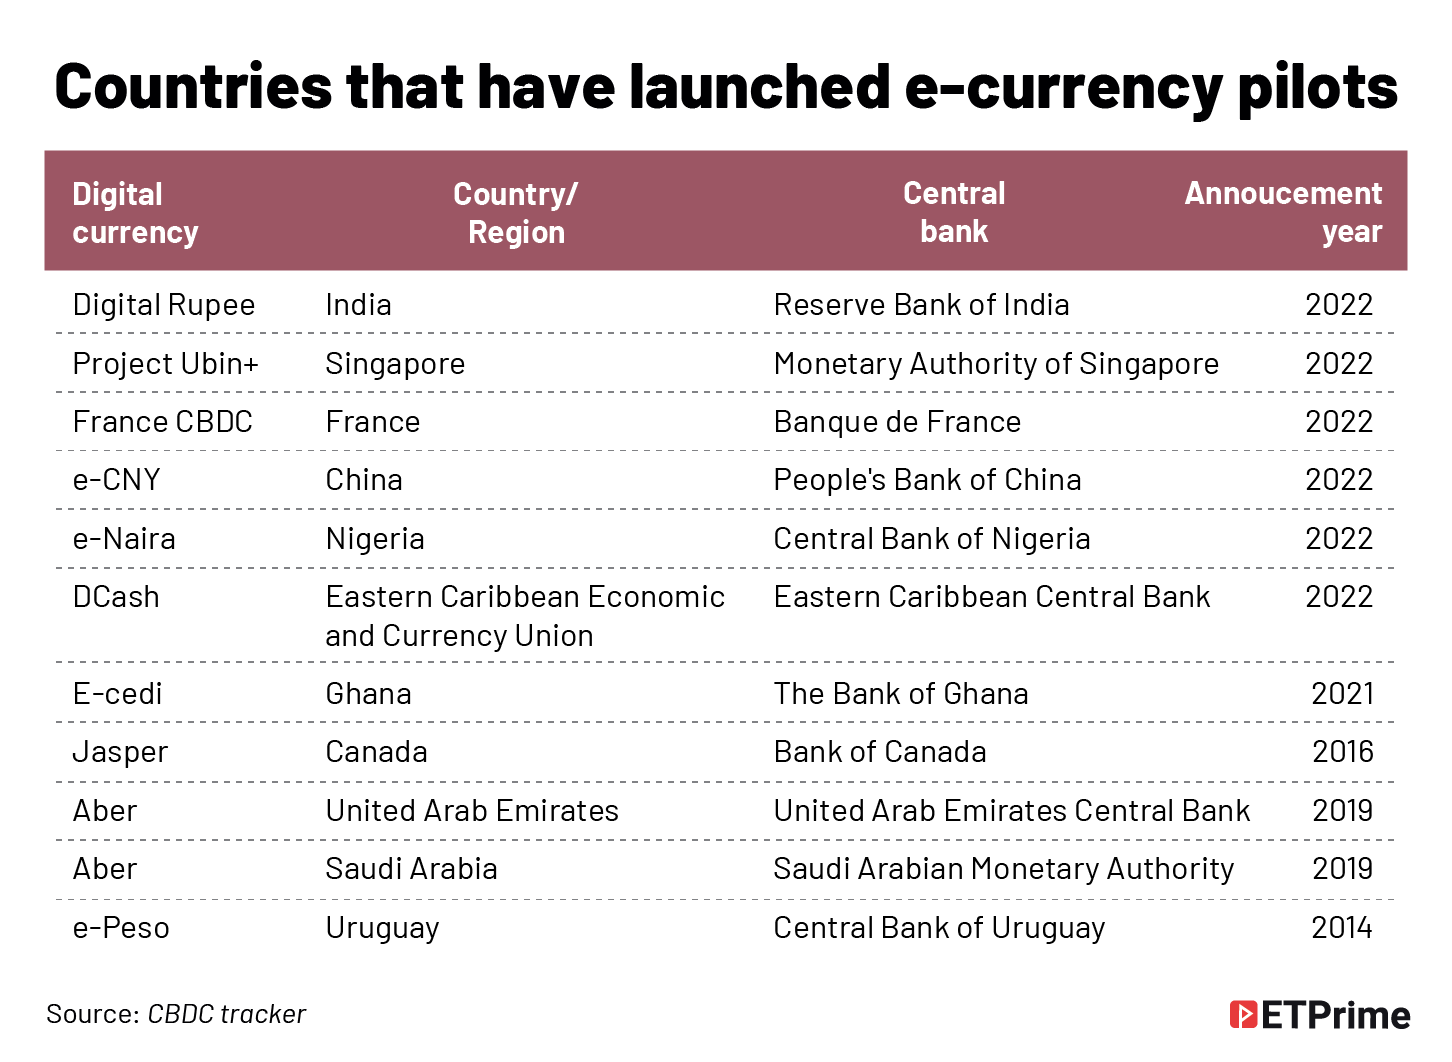 Countries that have launched e-currency pilots